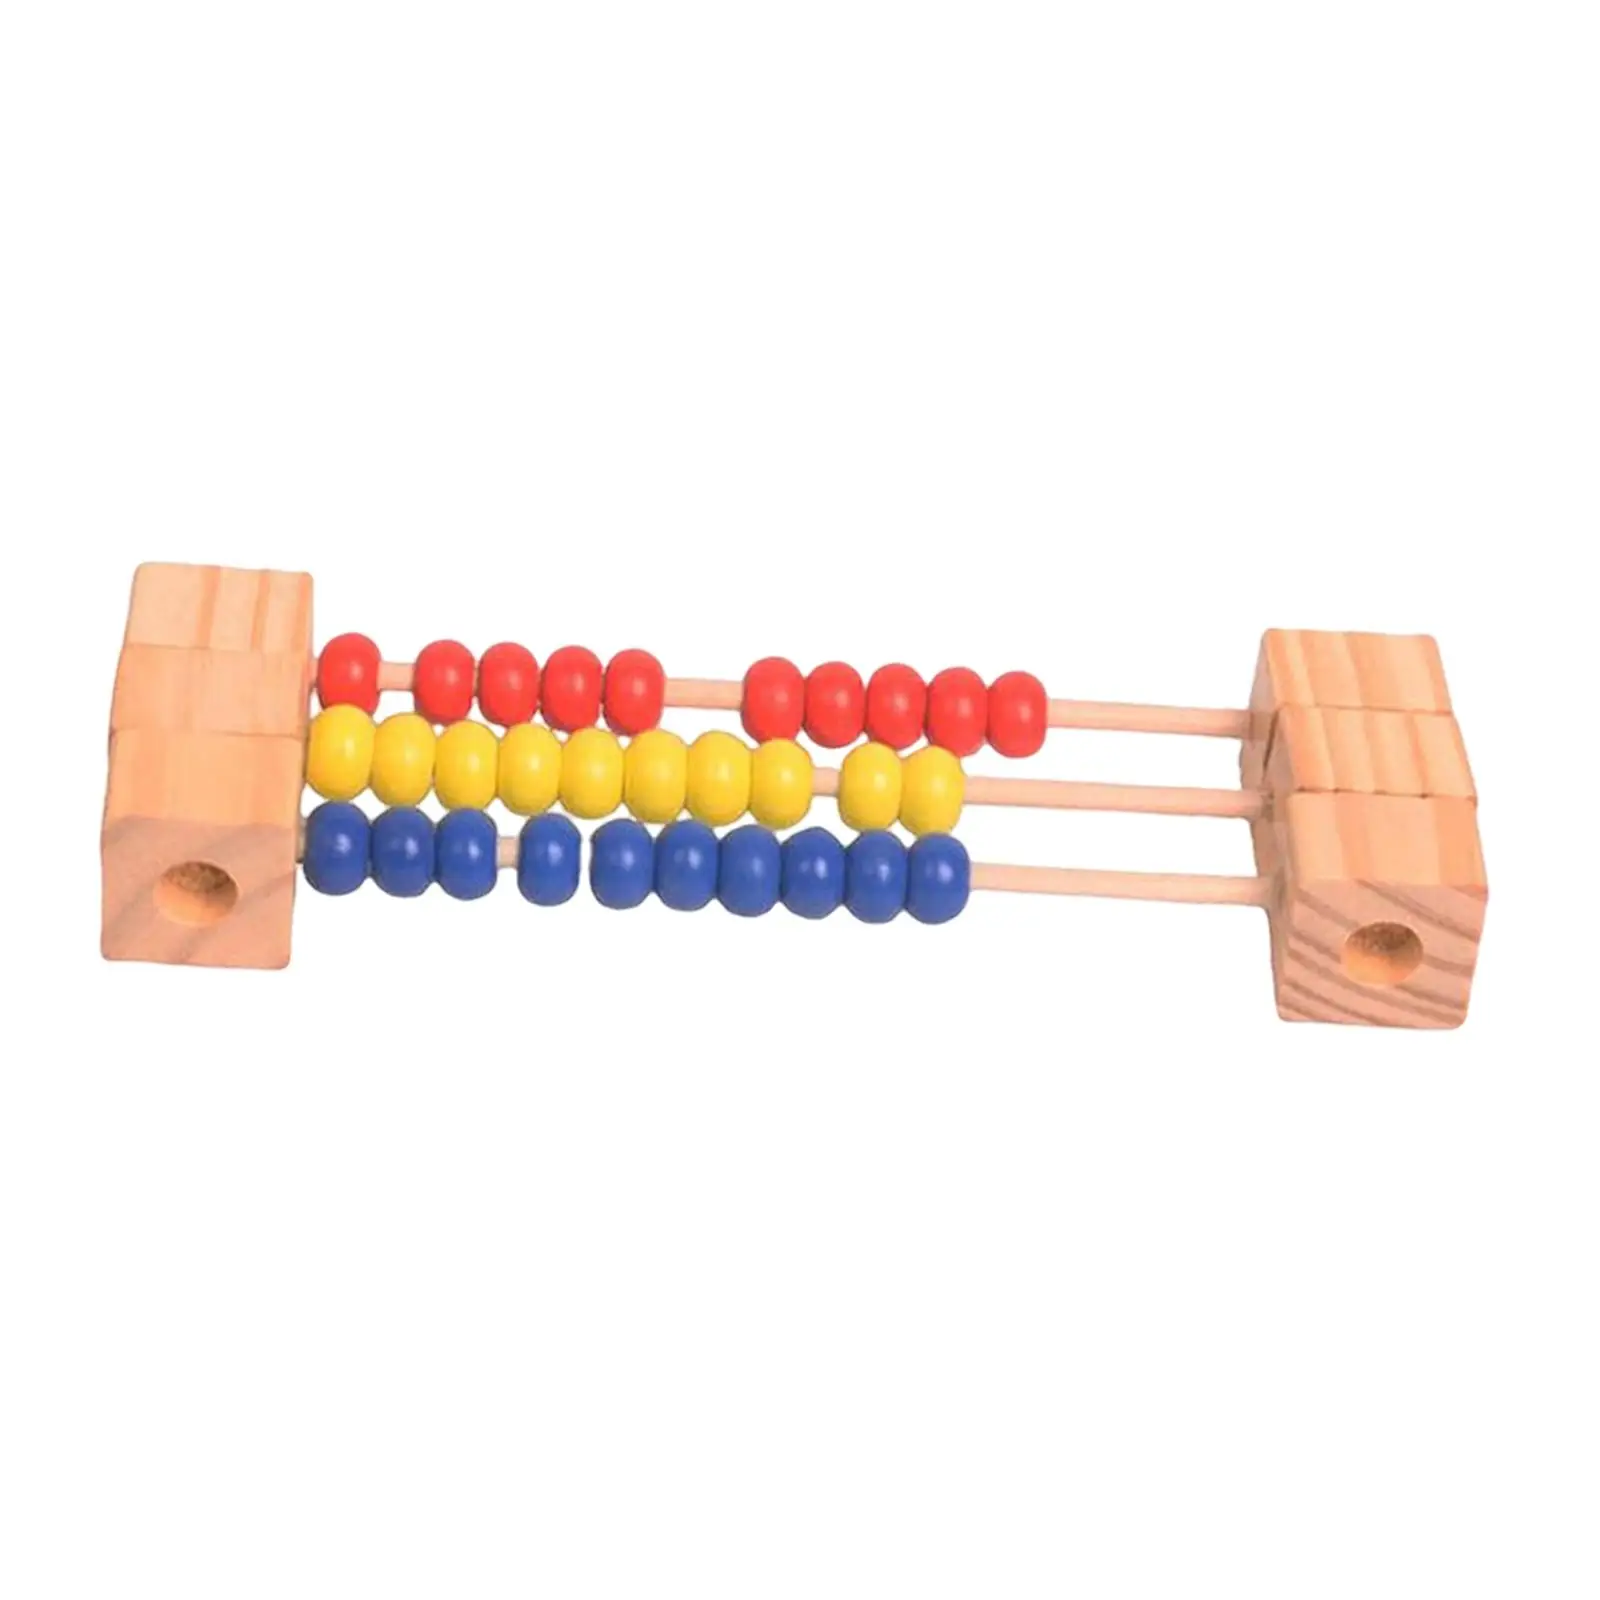 Montessori Wooden Abacus Counting Learning Toy Early Learning Educational Toy Miniature Counting Frame for Children Girls Gifts